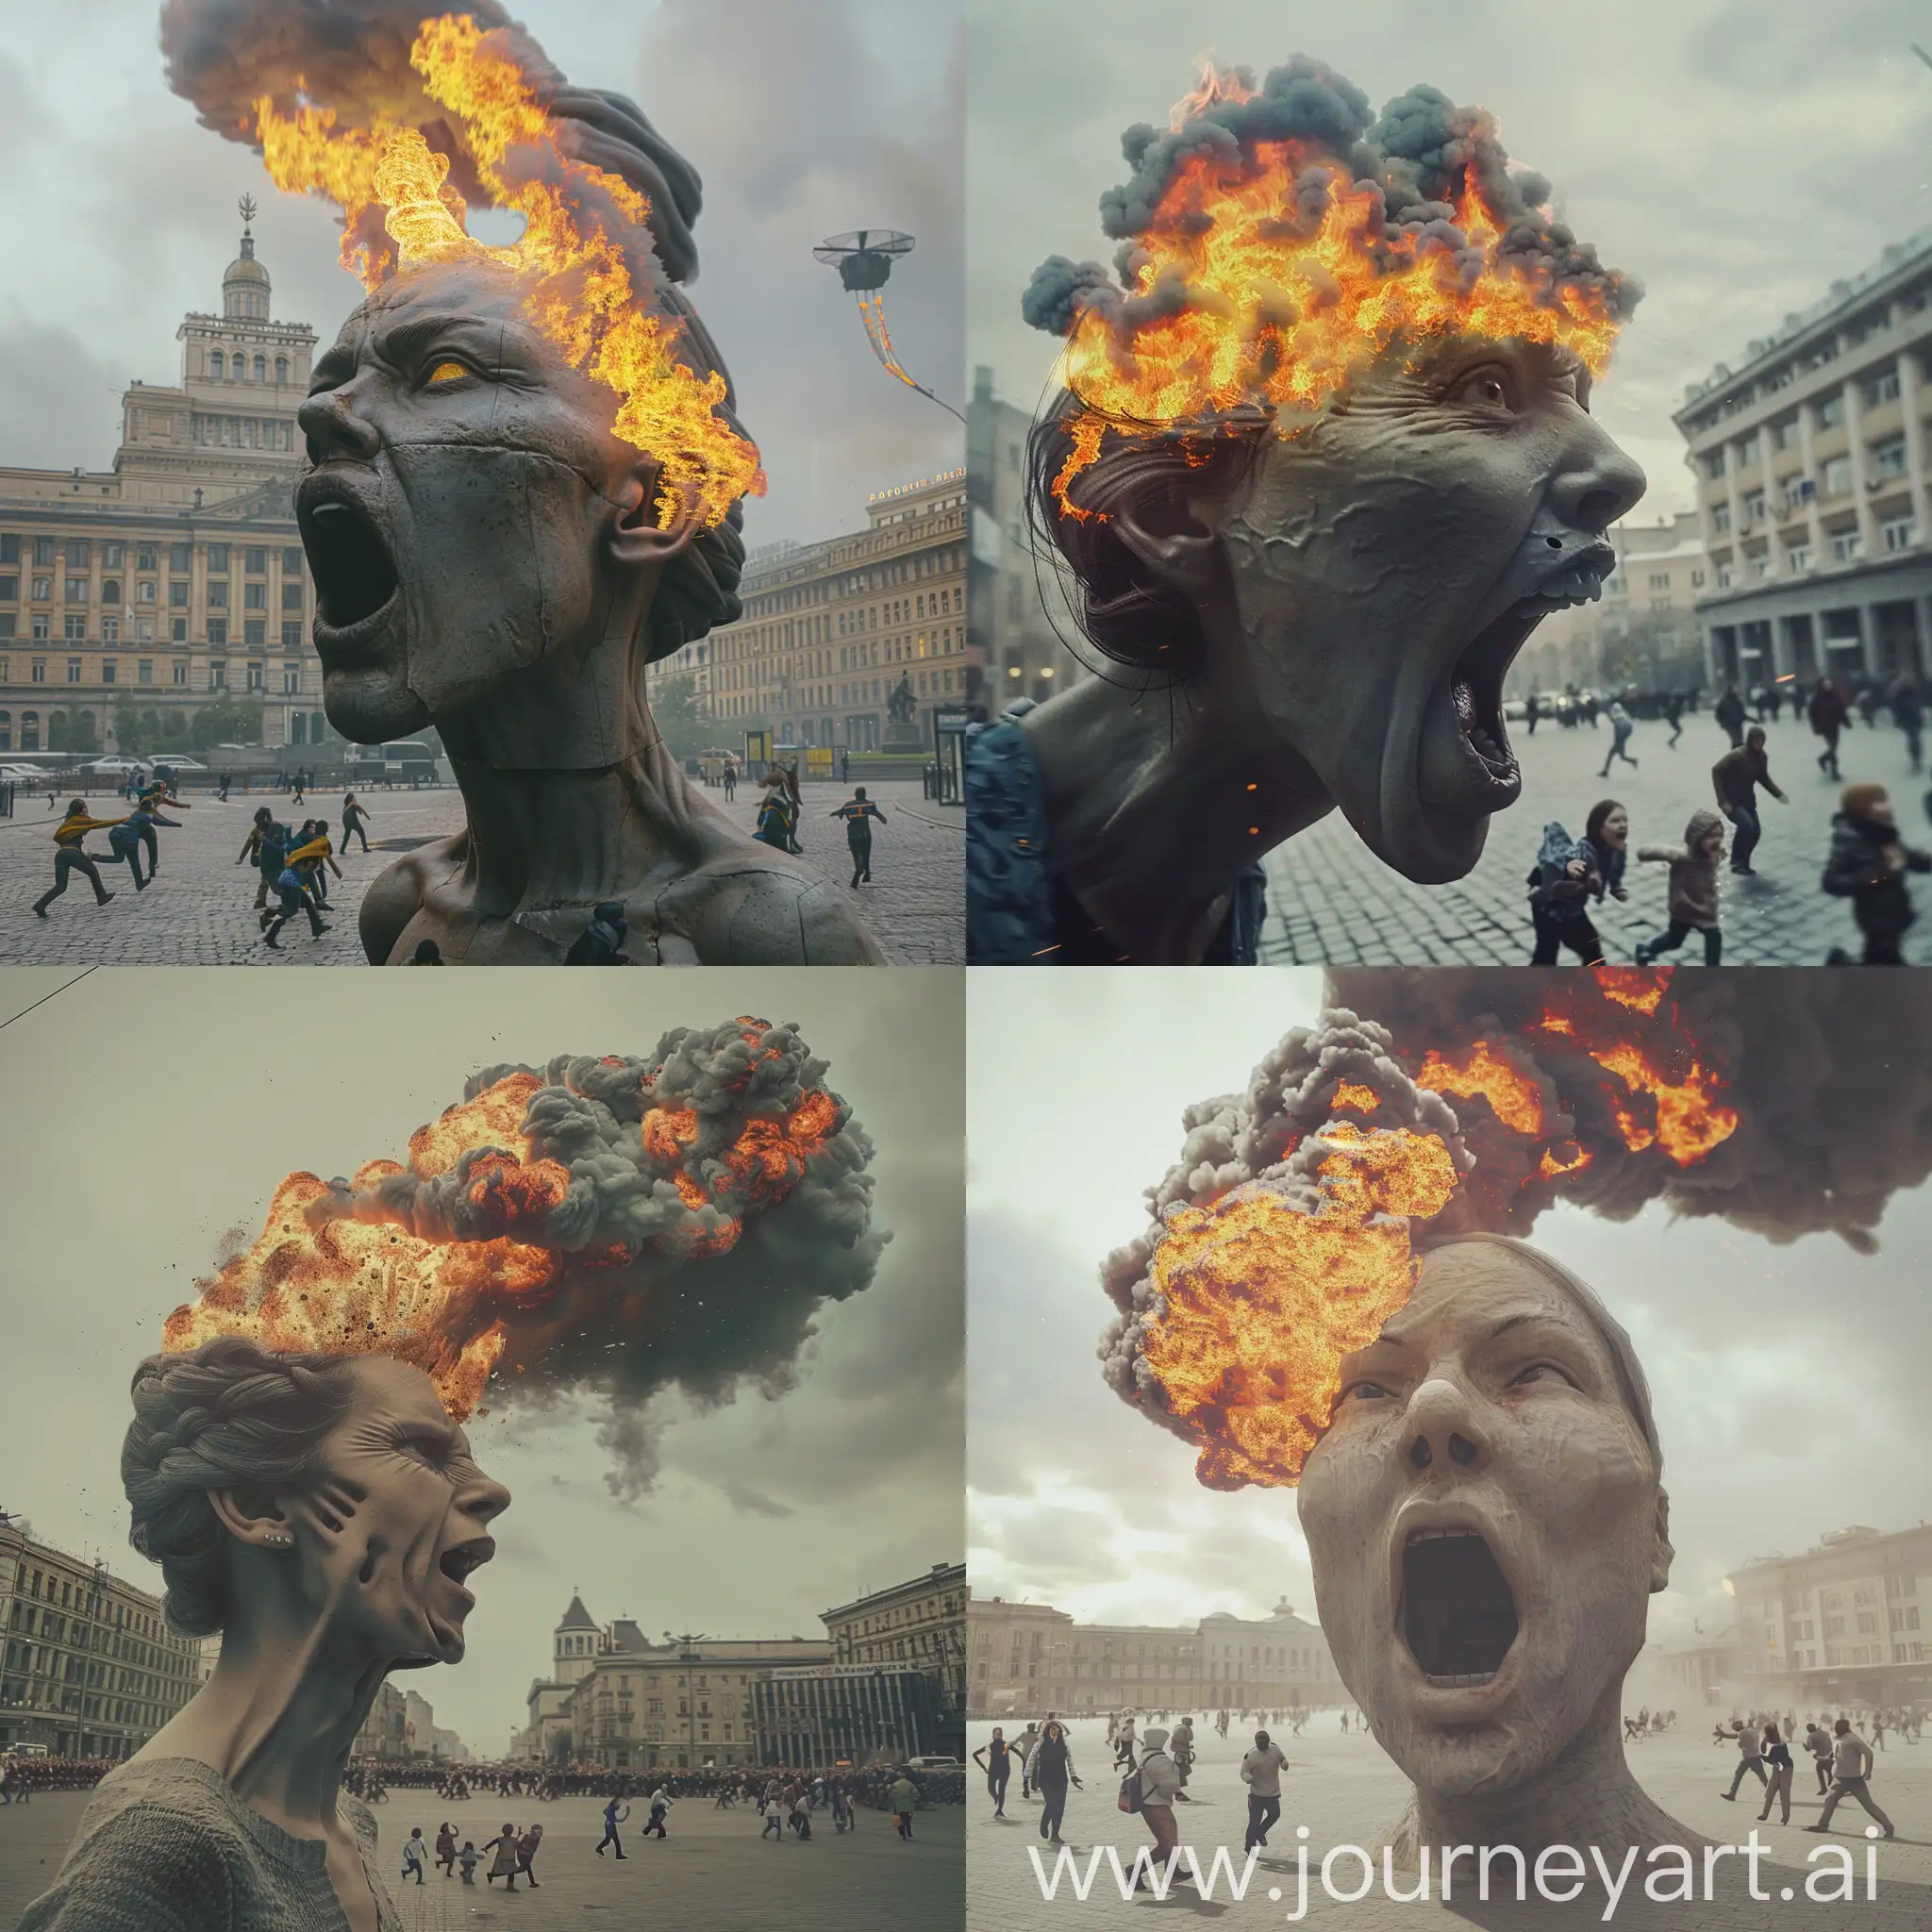 giant woman, fire from mouth, pan on head, little people run away from woman, panic, Maidan Nezalezhnosti, Independence Square in Ukraine, cinematic